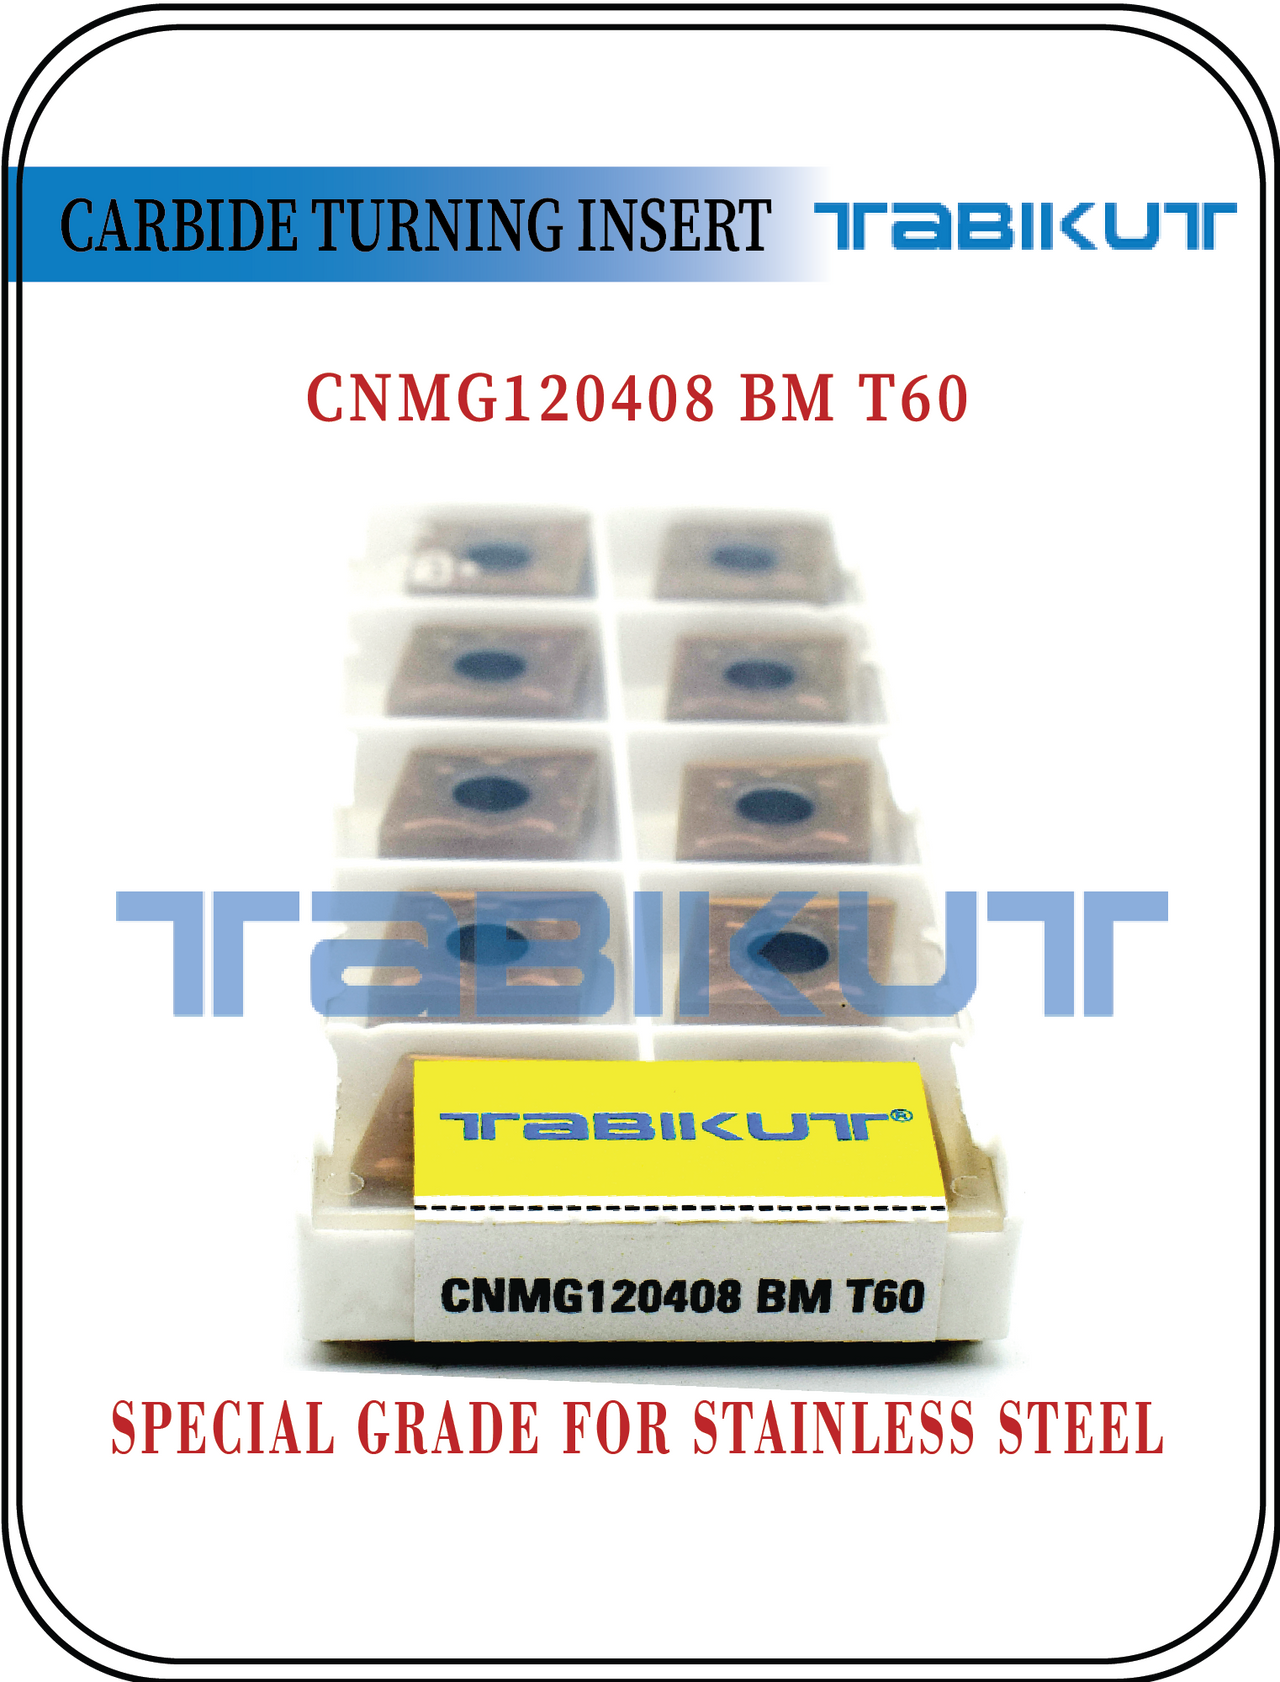 CNMG120408 BM T60 Stainless Steel